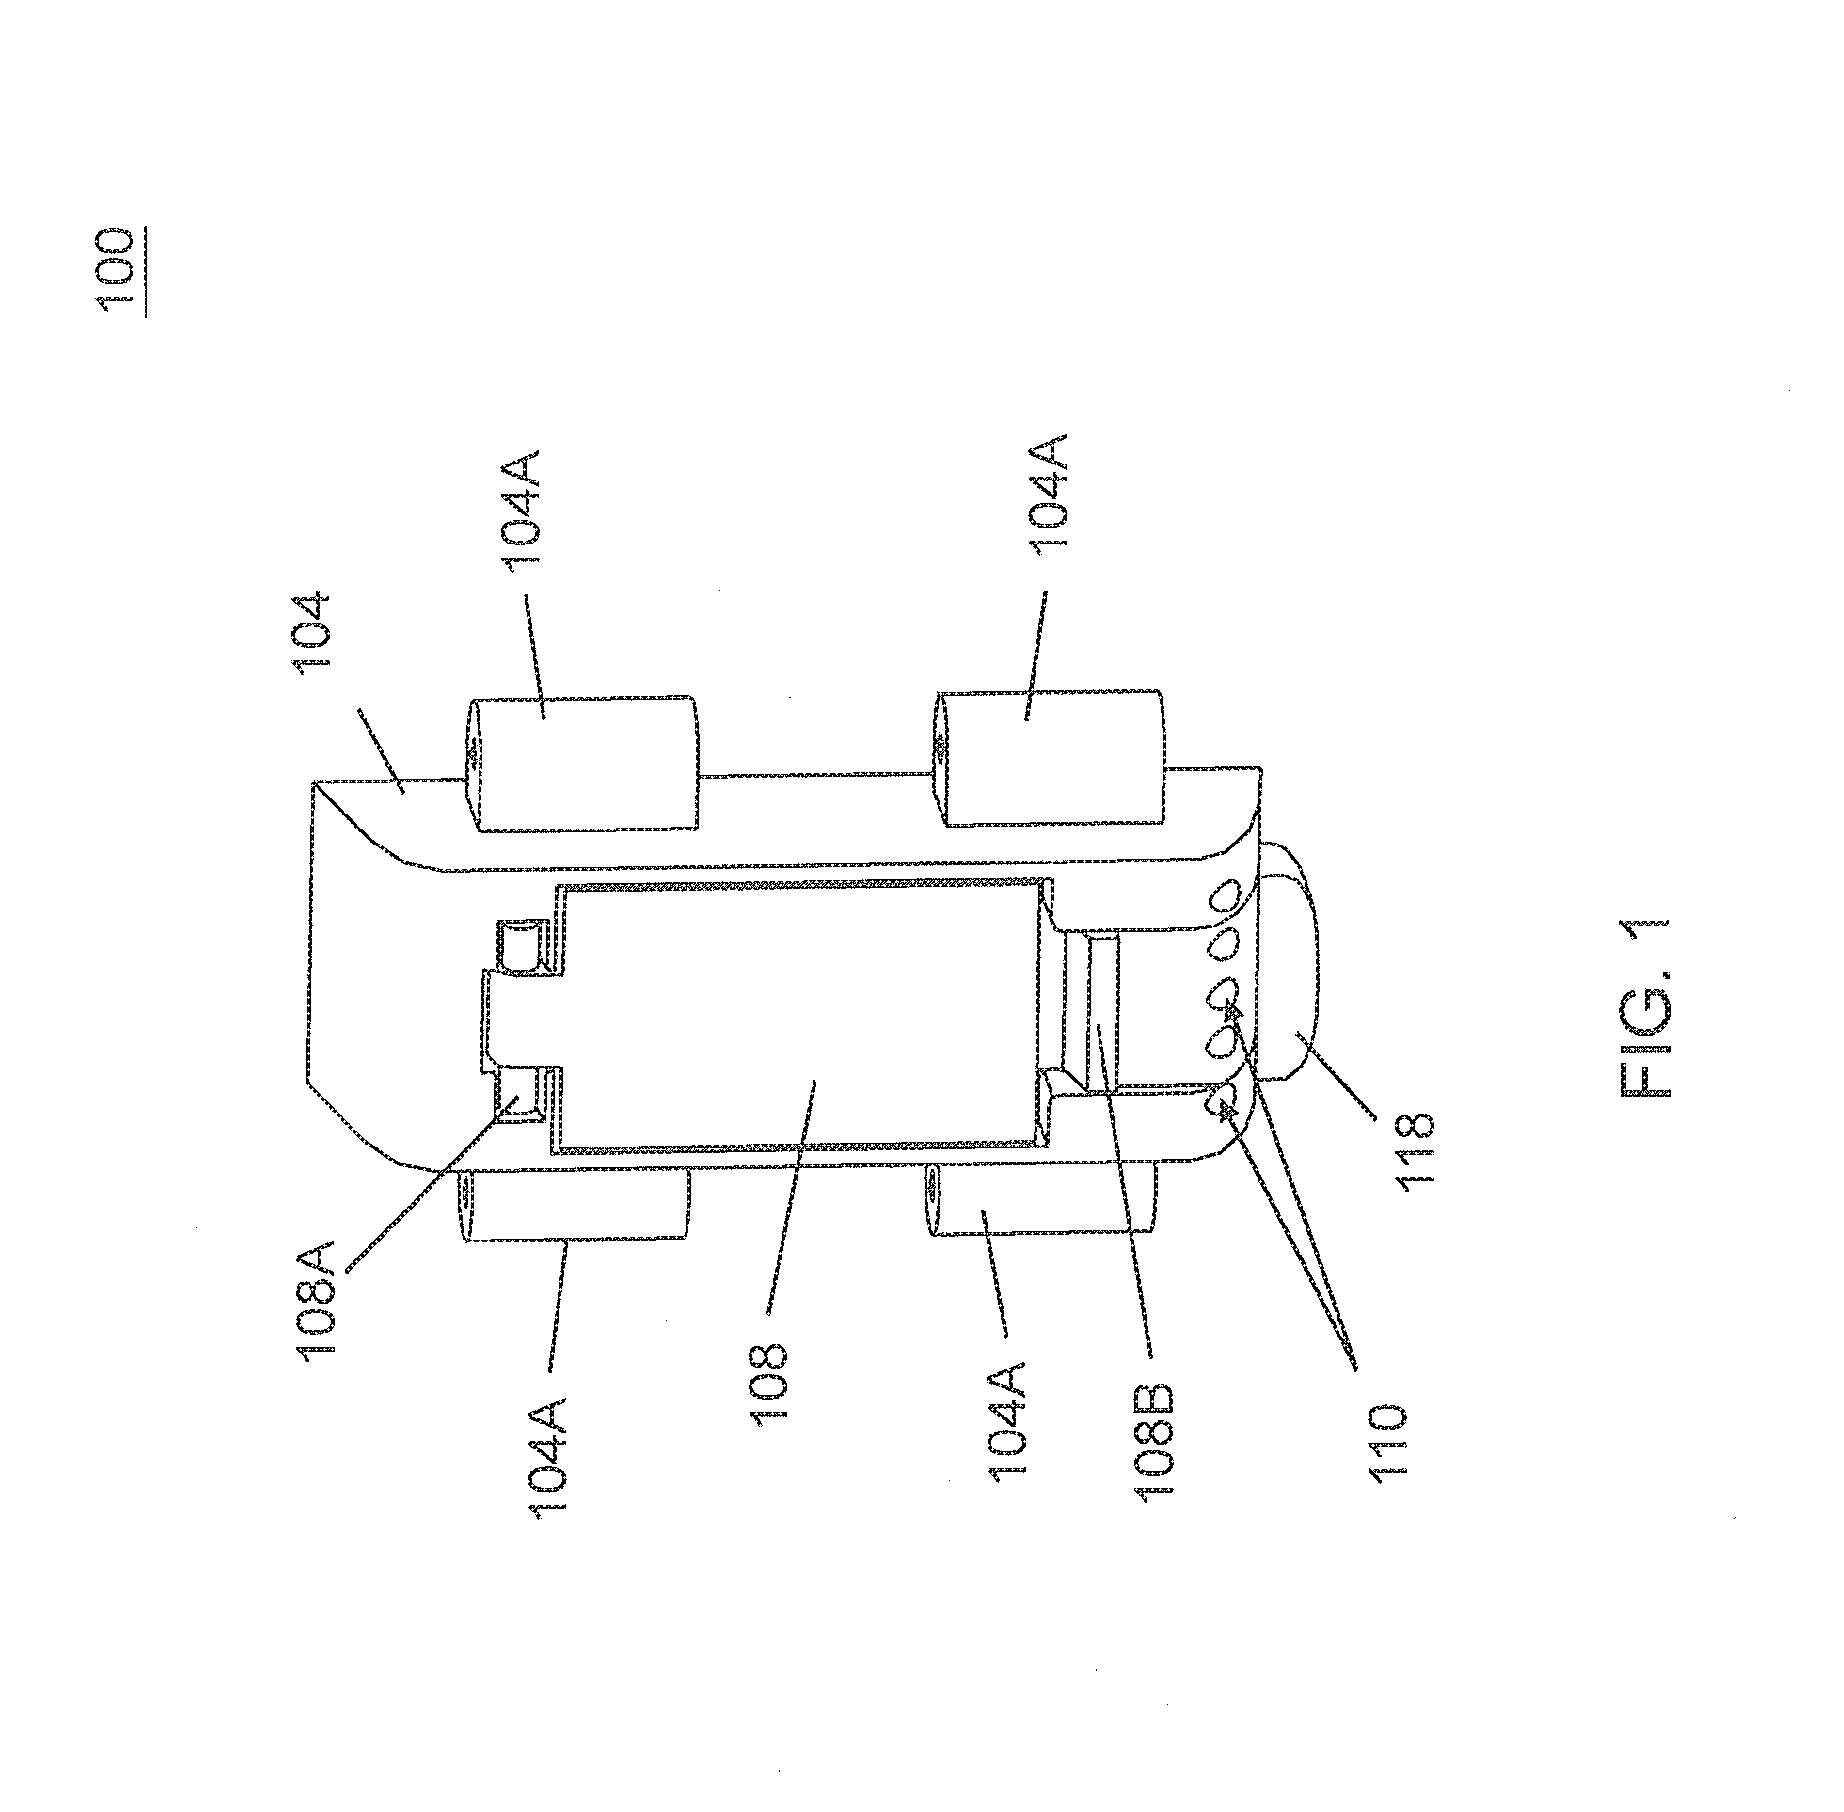 System and Method of Applying a Massage and Emitting an Aromatic Scent